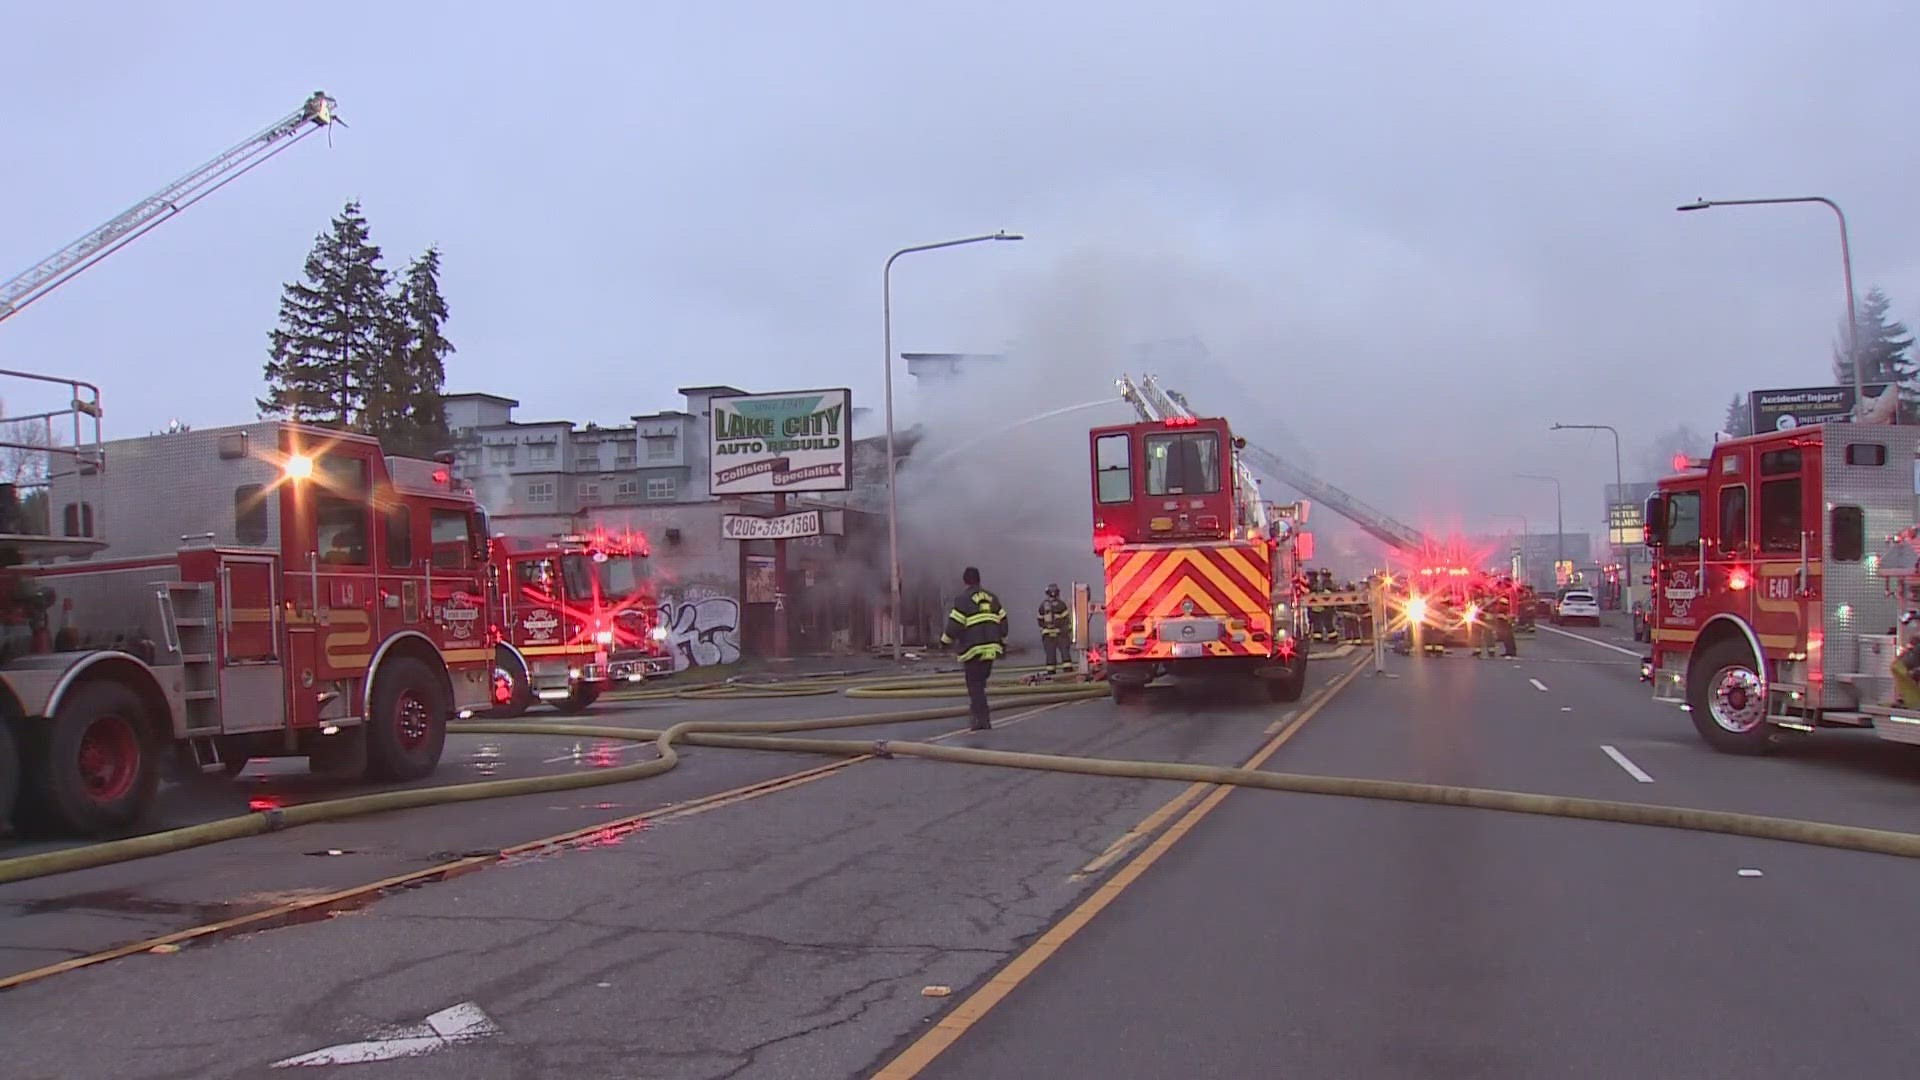 So far in 2023, there have been 29 vacant building fires in Seattle, resulting in three deaths.